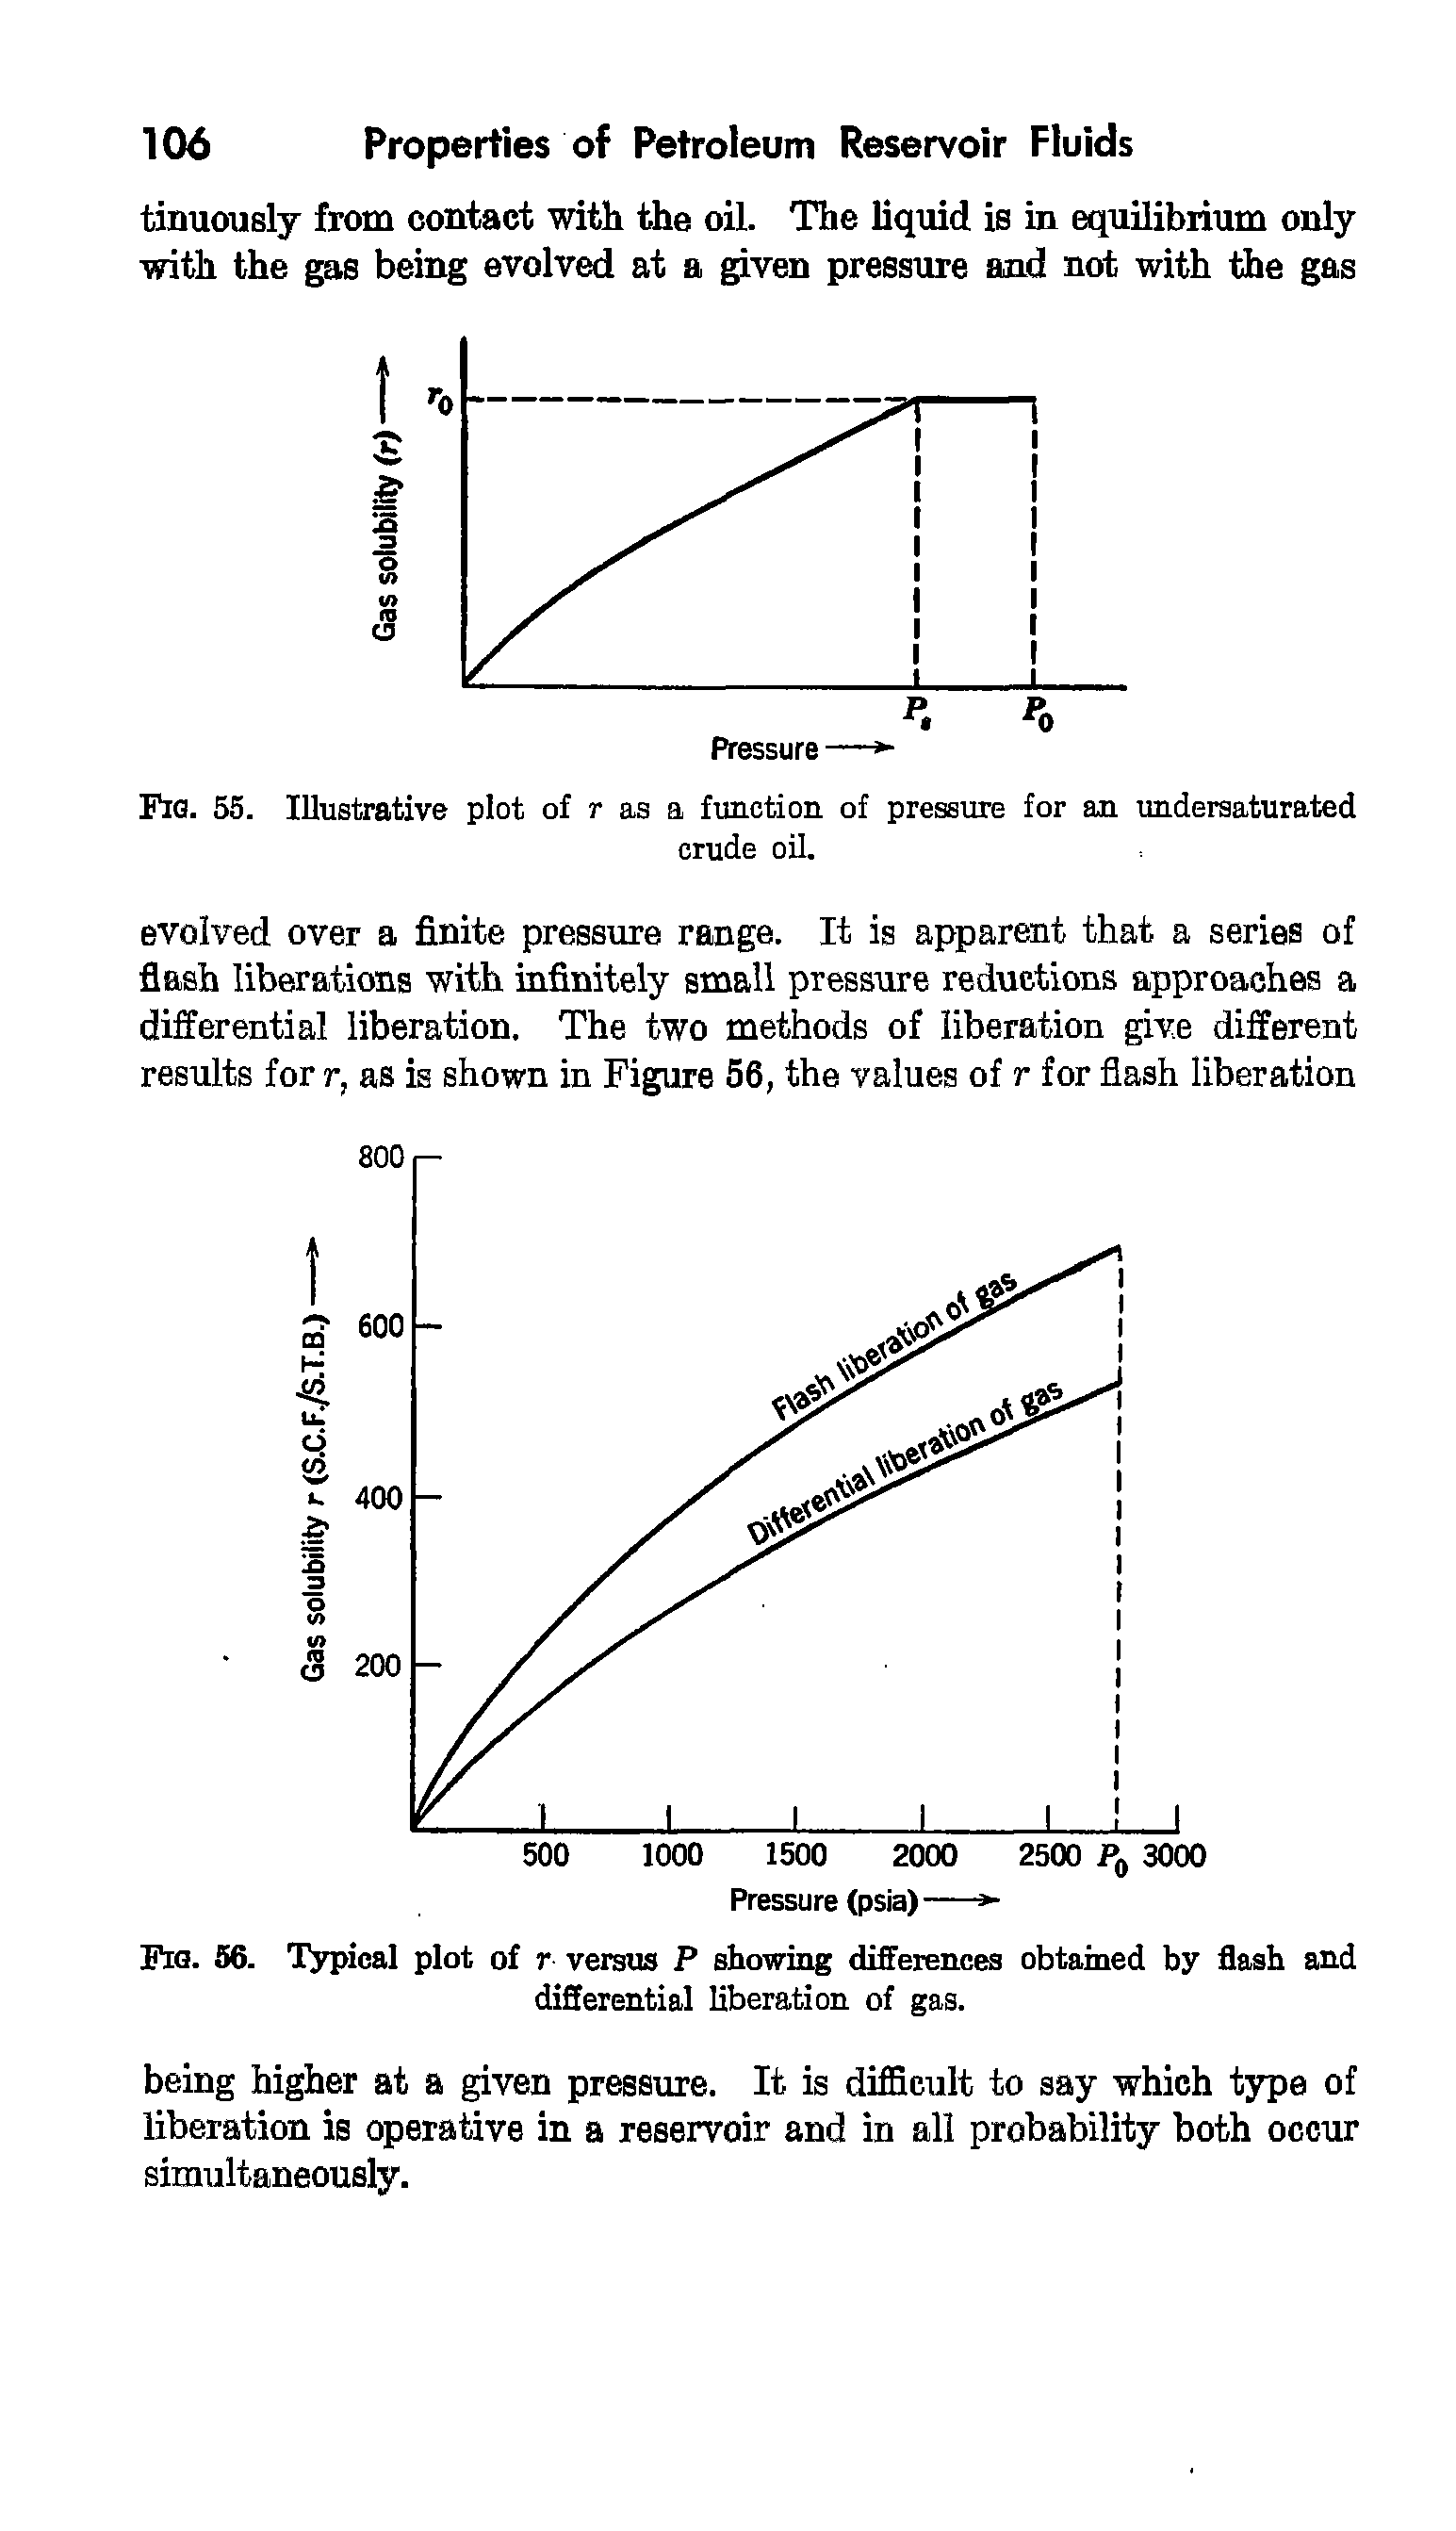 Fig. 56. Typical plot of r versus P showing differences obtained by flash and differential liberation of gas.